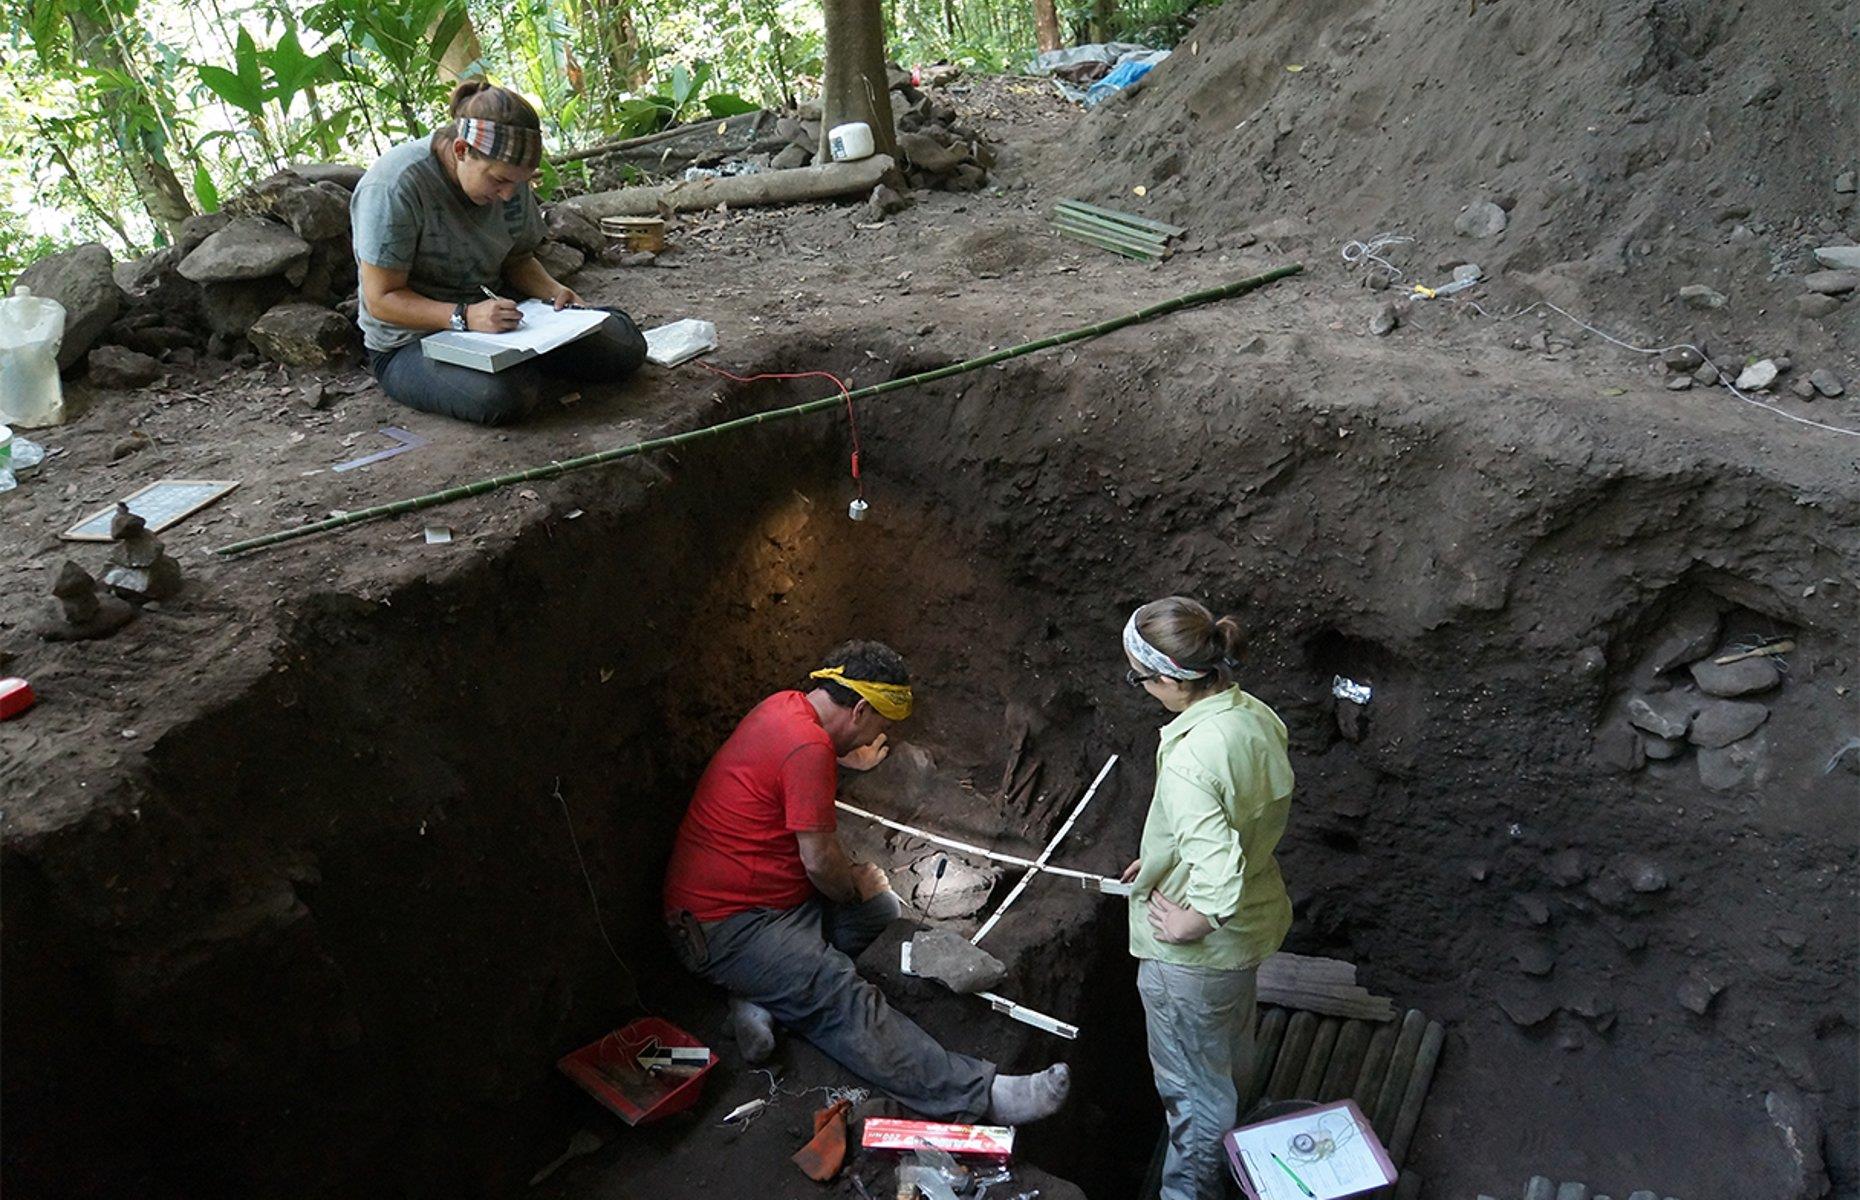 <p>Over the last few years, archaeologists in Belize have dug up surprisingly well-preserved human skeletons from shallow graves underneath two rock shelters in Bladen Nature Reserve. A report published in 2022 revealed the surprising results of the skeletons' analysis – they’re up to 9,600 years old, and their genetic makeup suggests a mass migration from the south more than 5,600 years ago that preceded the advent of intensive maize farming in the region. </p>  <p>Archaeologists think the remains may have been migrants whose agricultural techniques eventually helped new civilizations to flourish.</p>